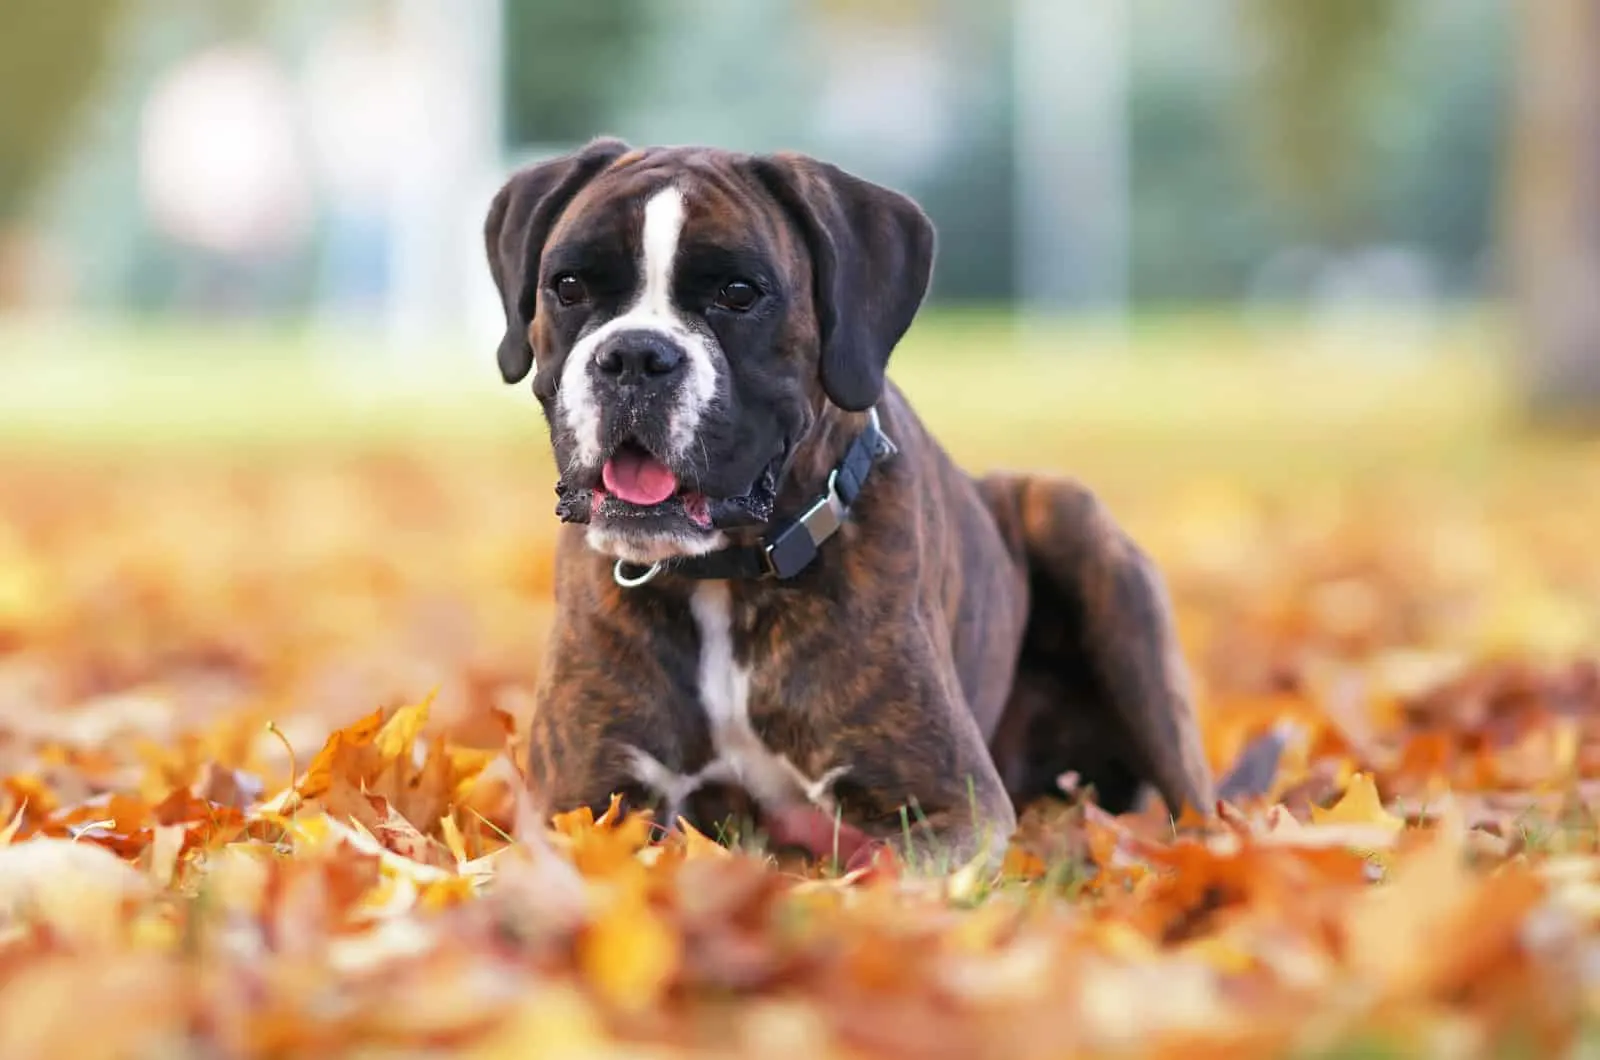 boxer lies in autumn leaves